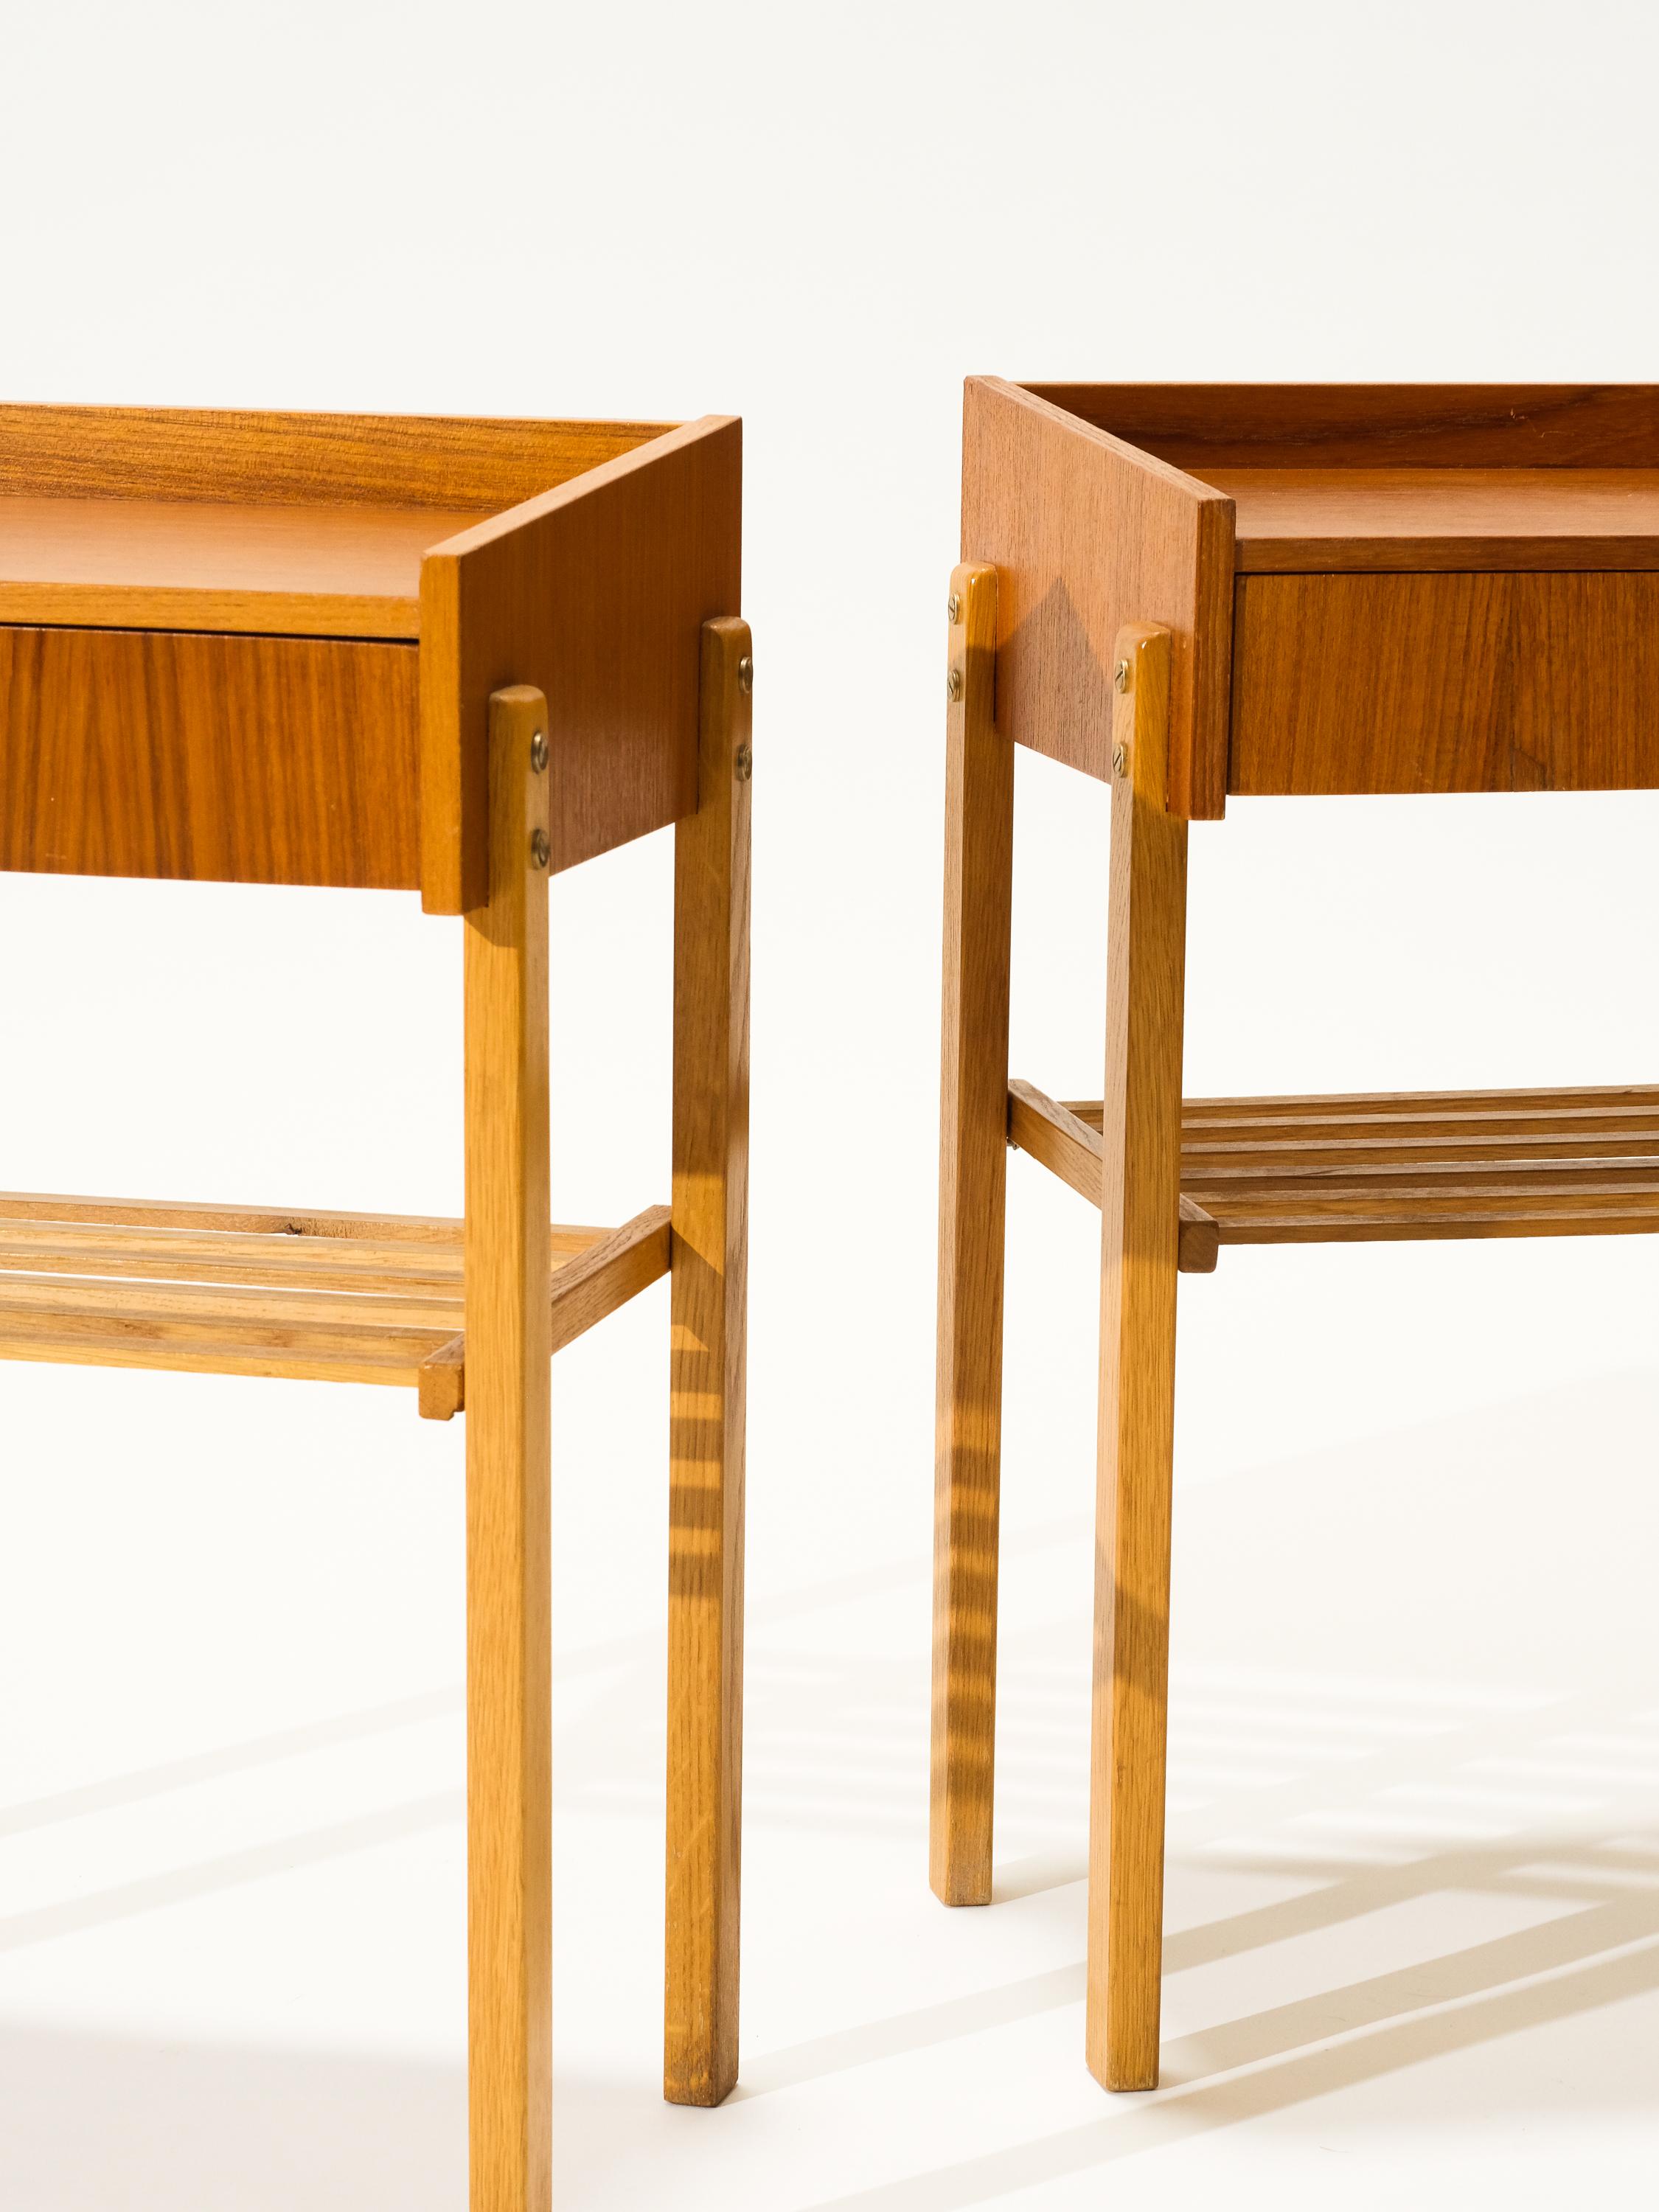 This set of two teak veneer bedside tables was made in Sweden during the 1950s. They have a drawer and a handy shelf. The legs are made of solid oak wood. This set is perfect match to modernist and classic trend.

Tables are in original vintage